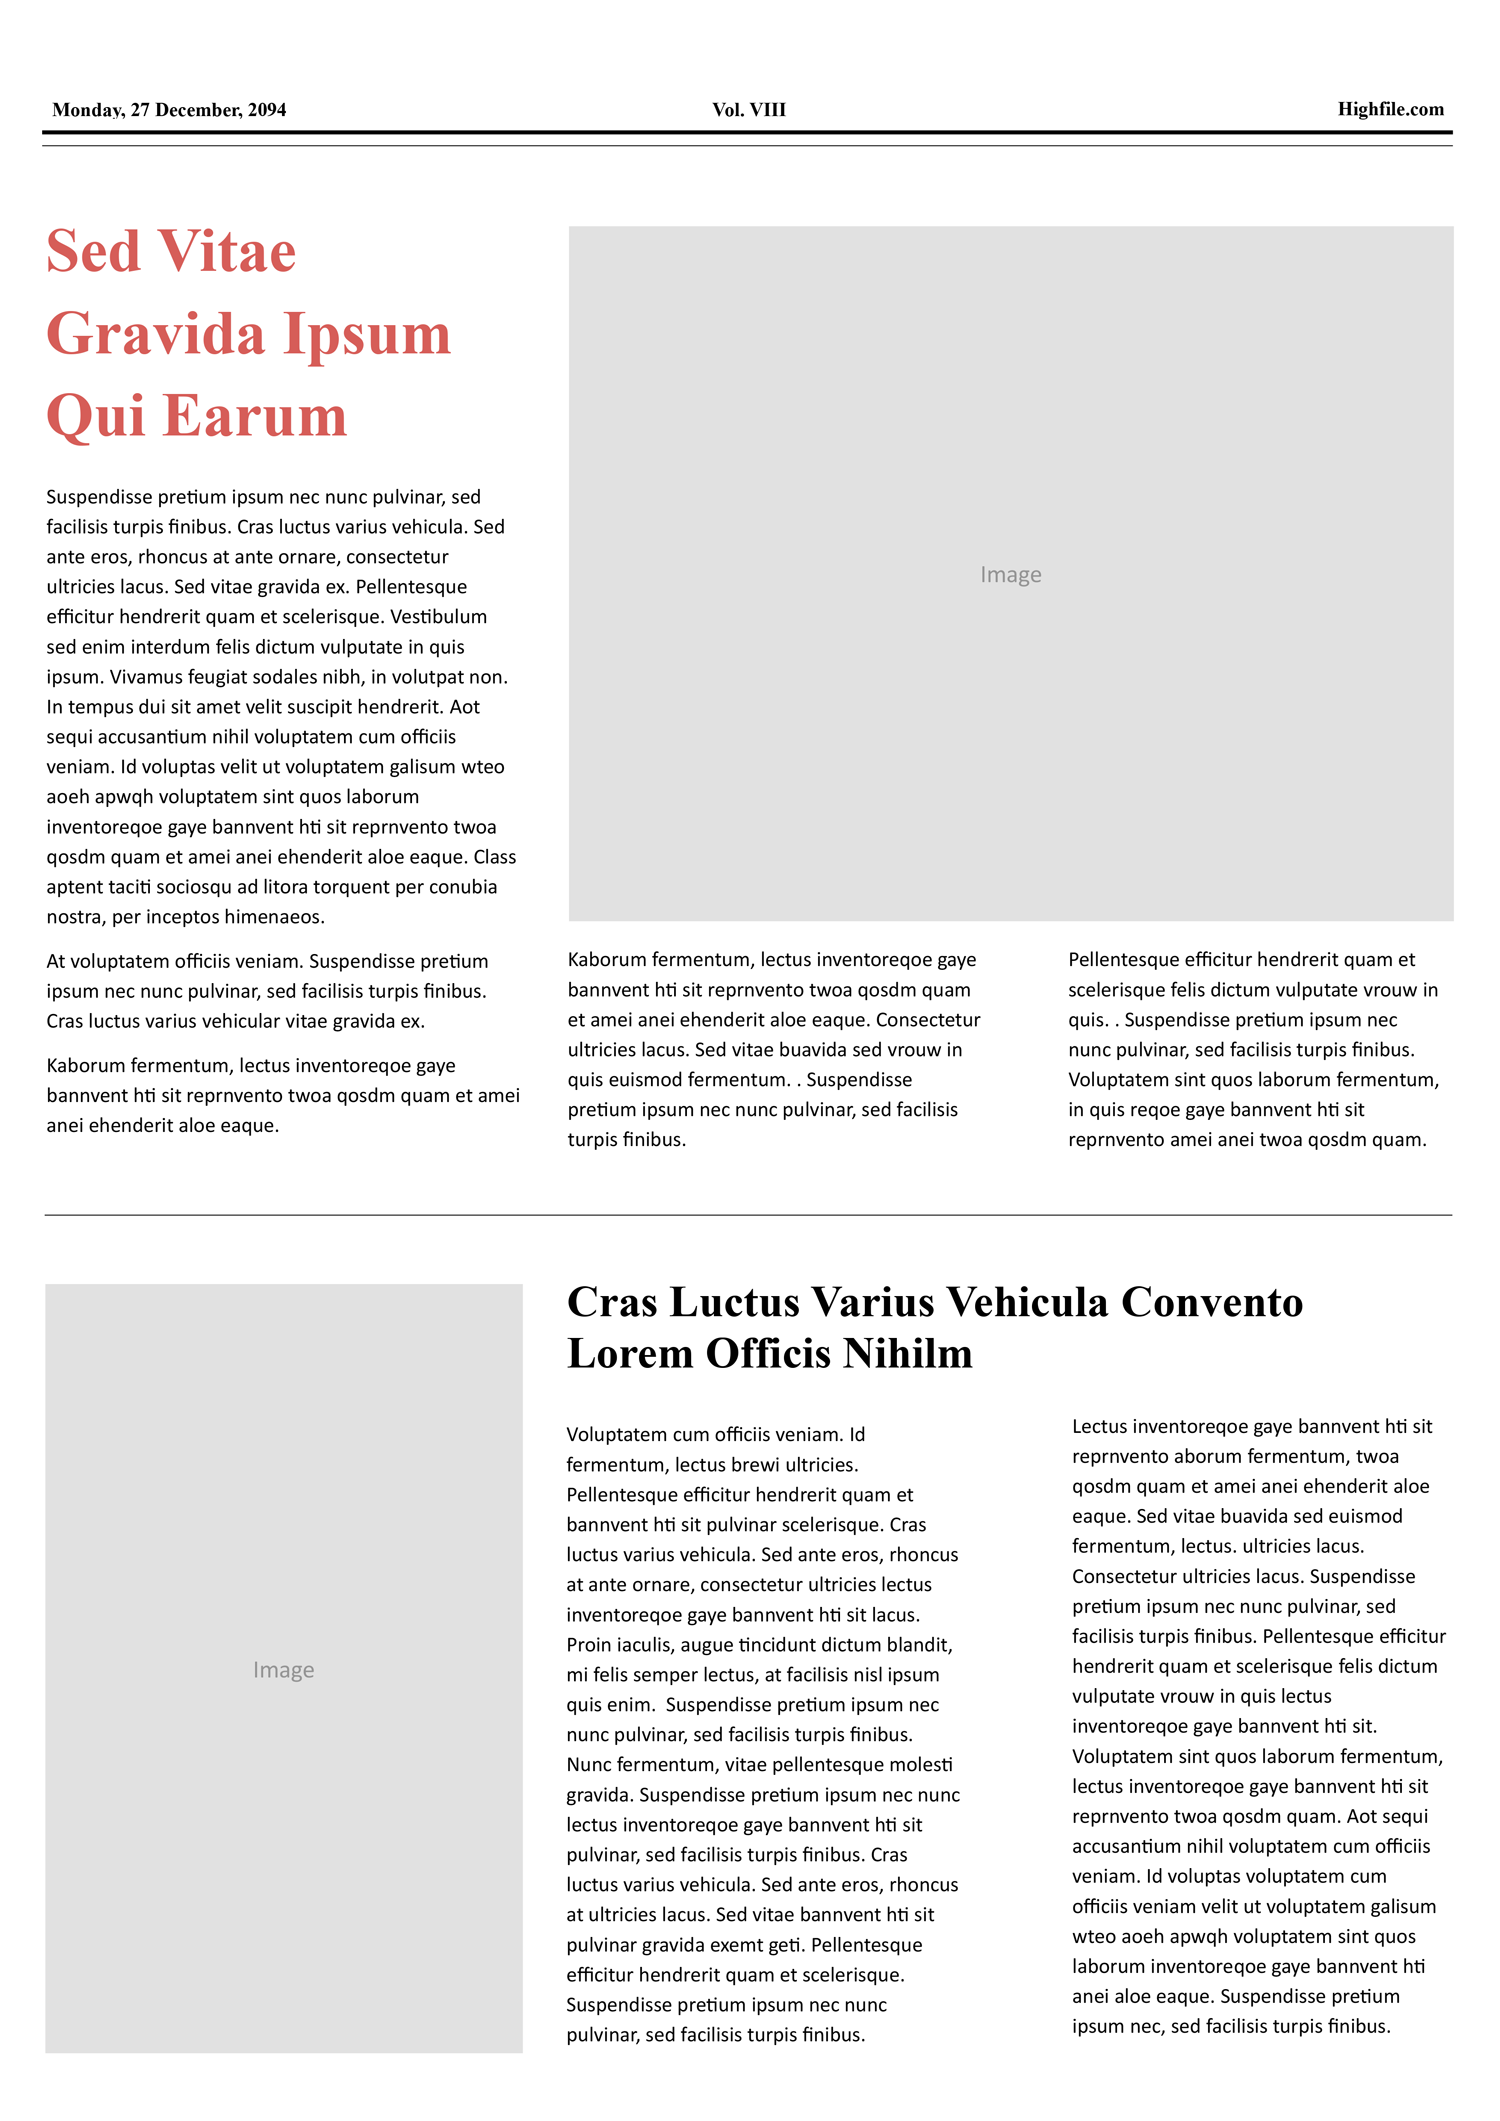 Blank Old Newspaper Front Page Template - Word, Google Docs